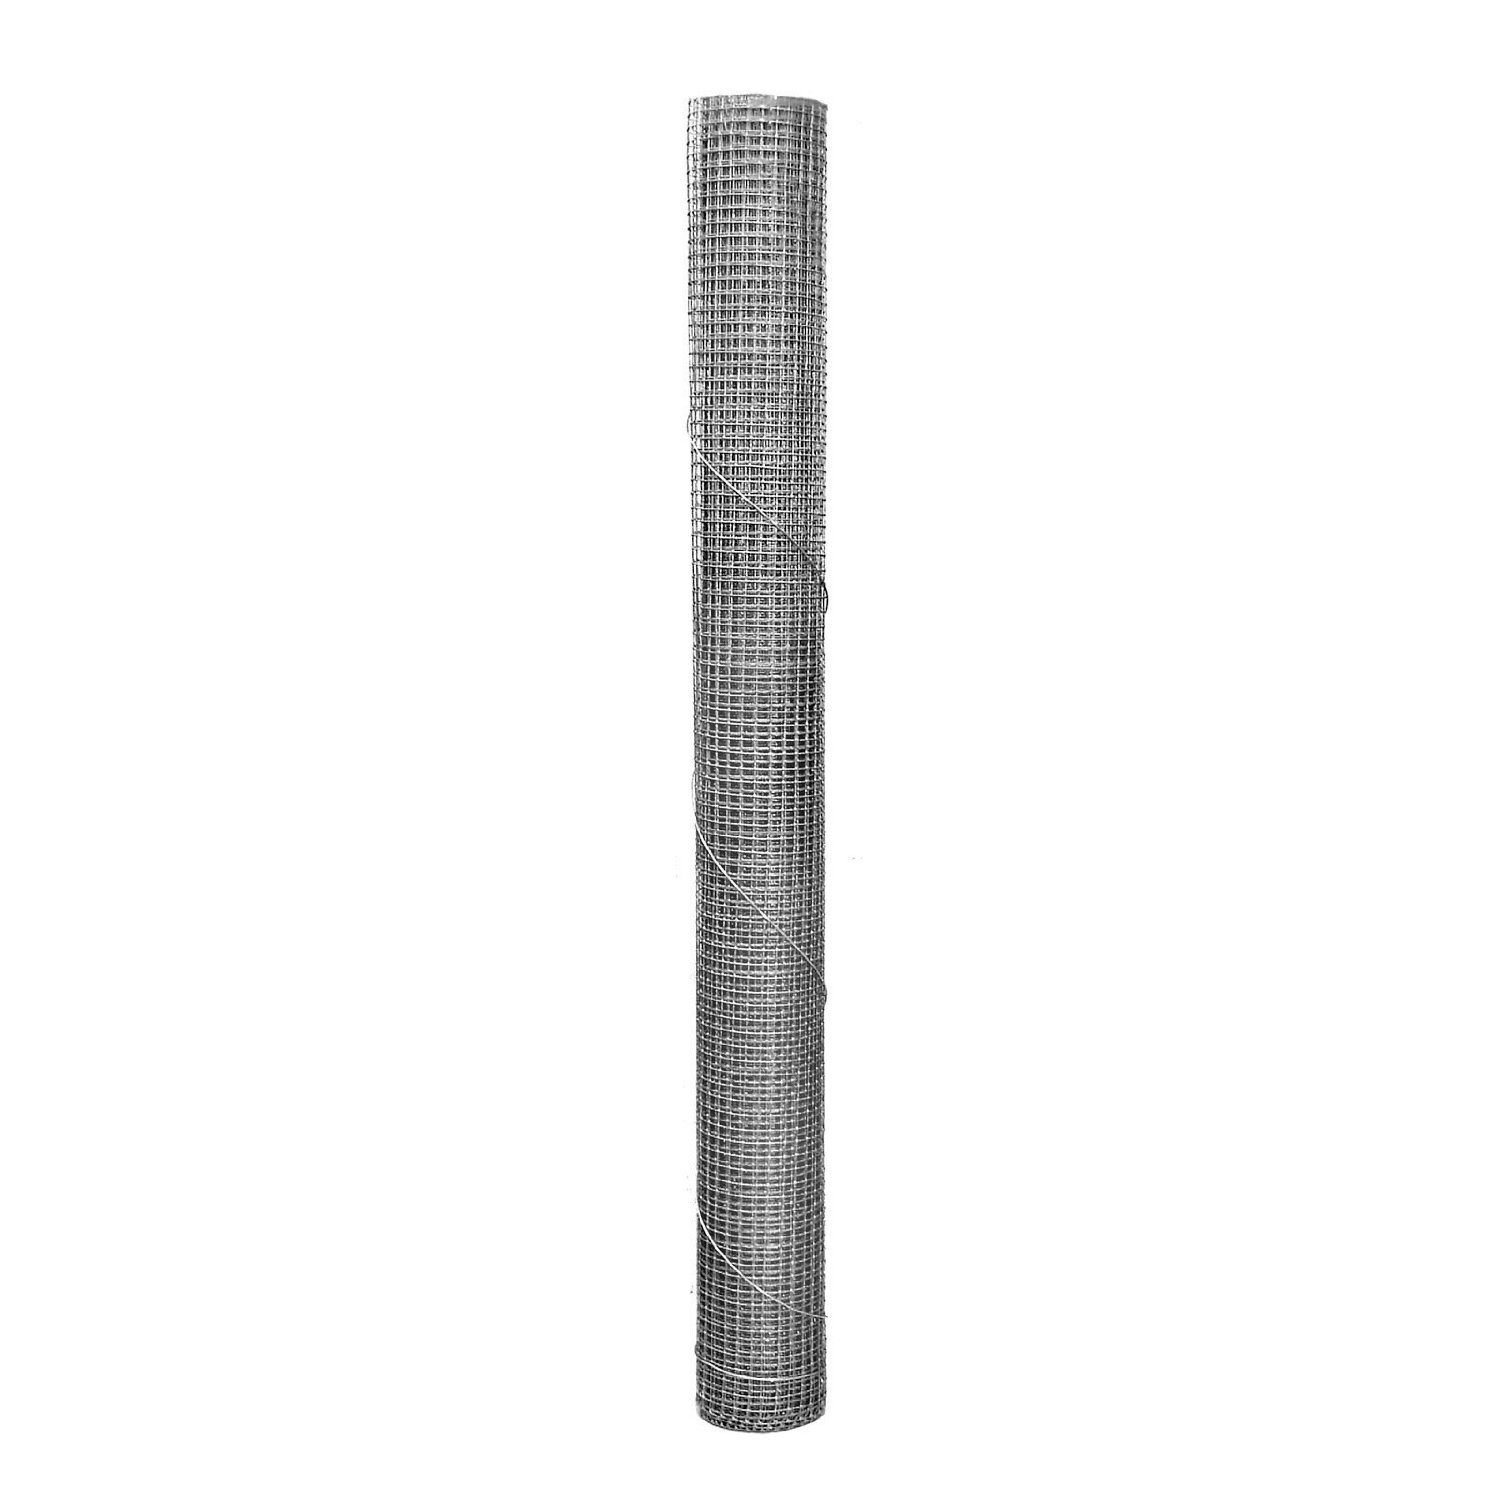 1/4 in. Mesh Long Hardware Cloth, 24 in. x 5 ft.